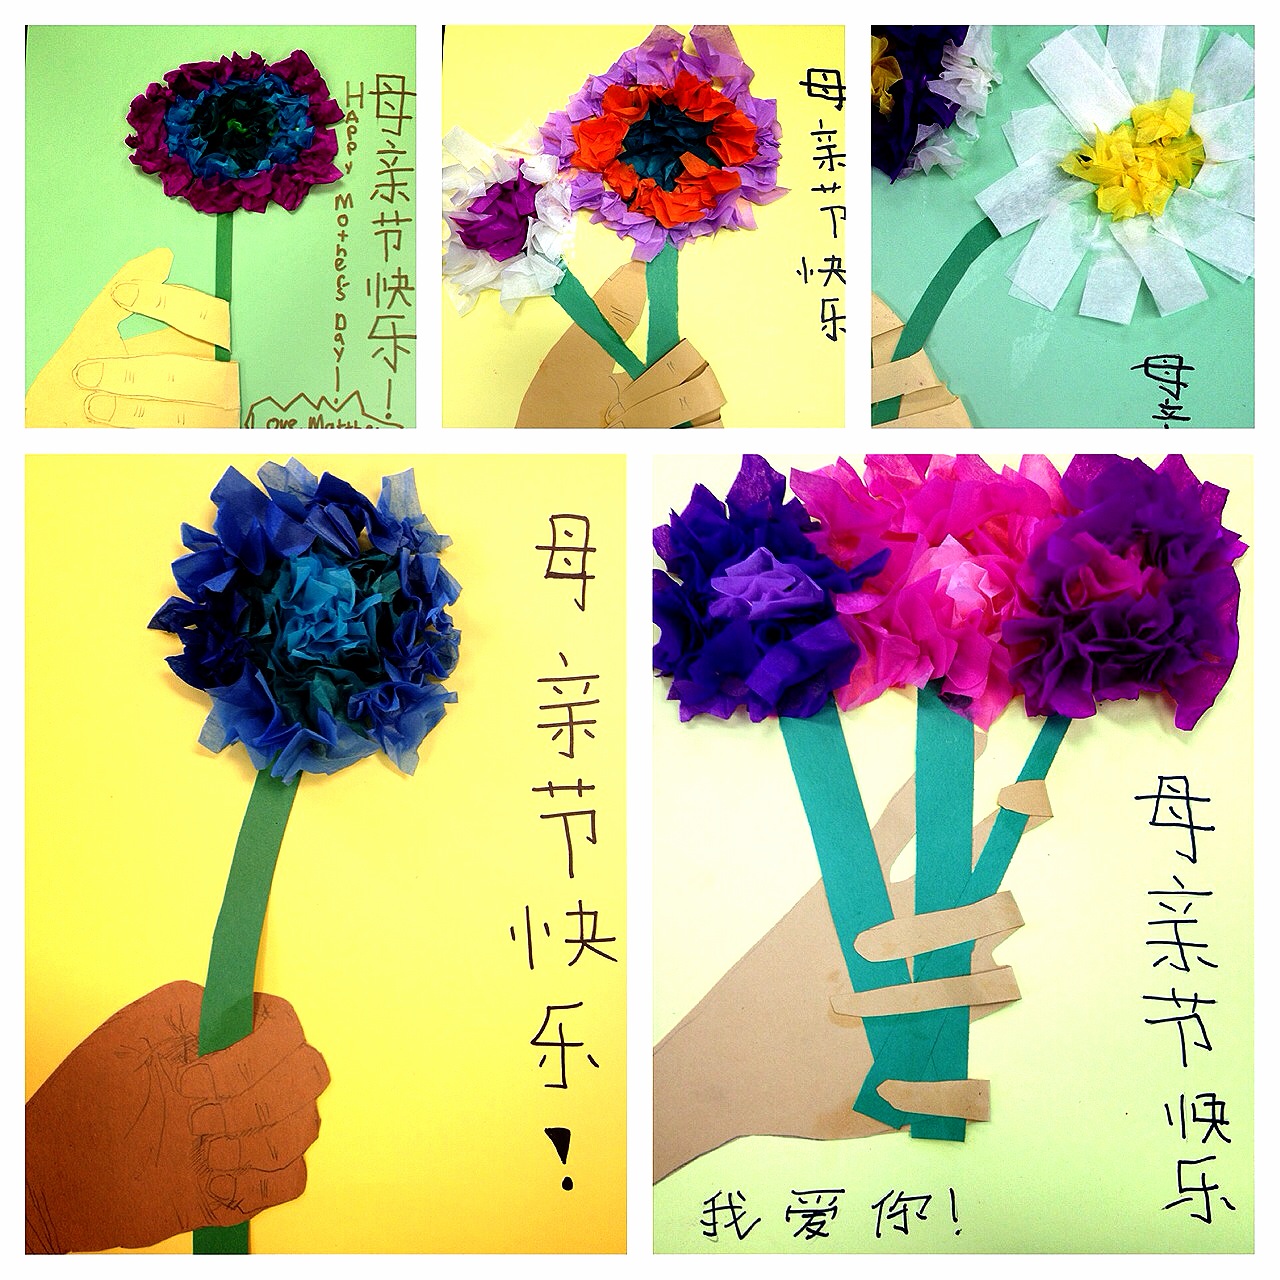 Different types of tissue paper flowers